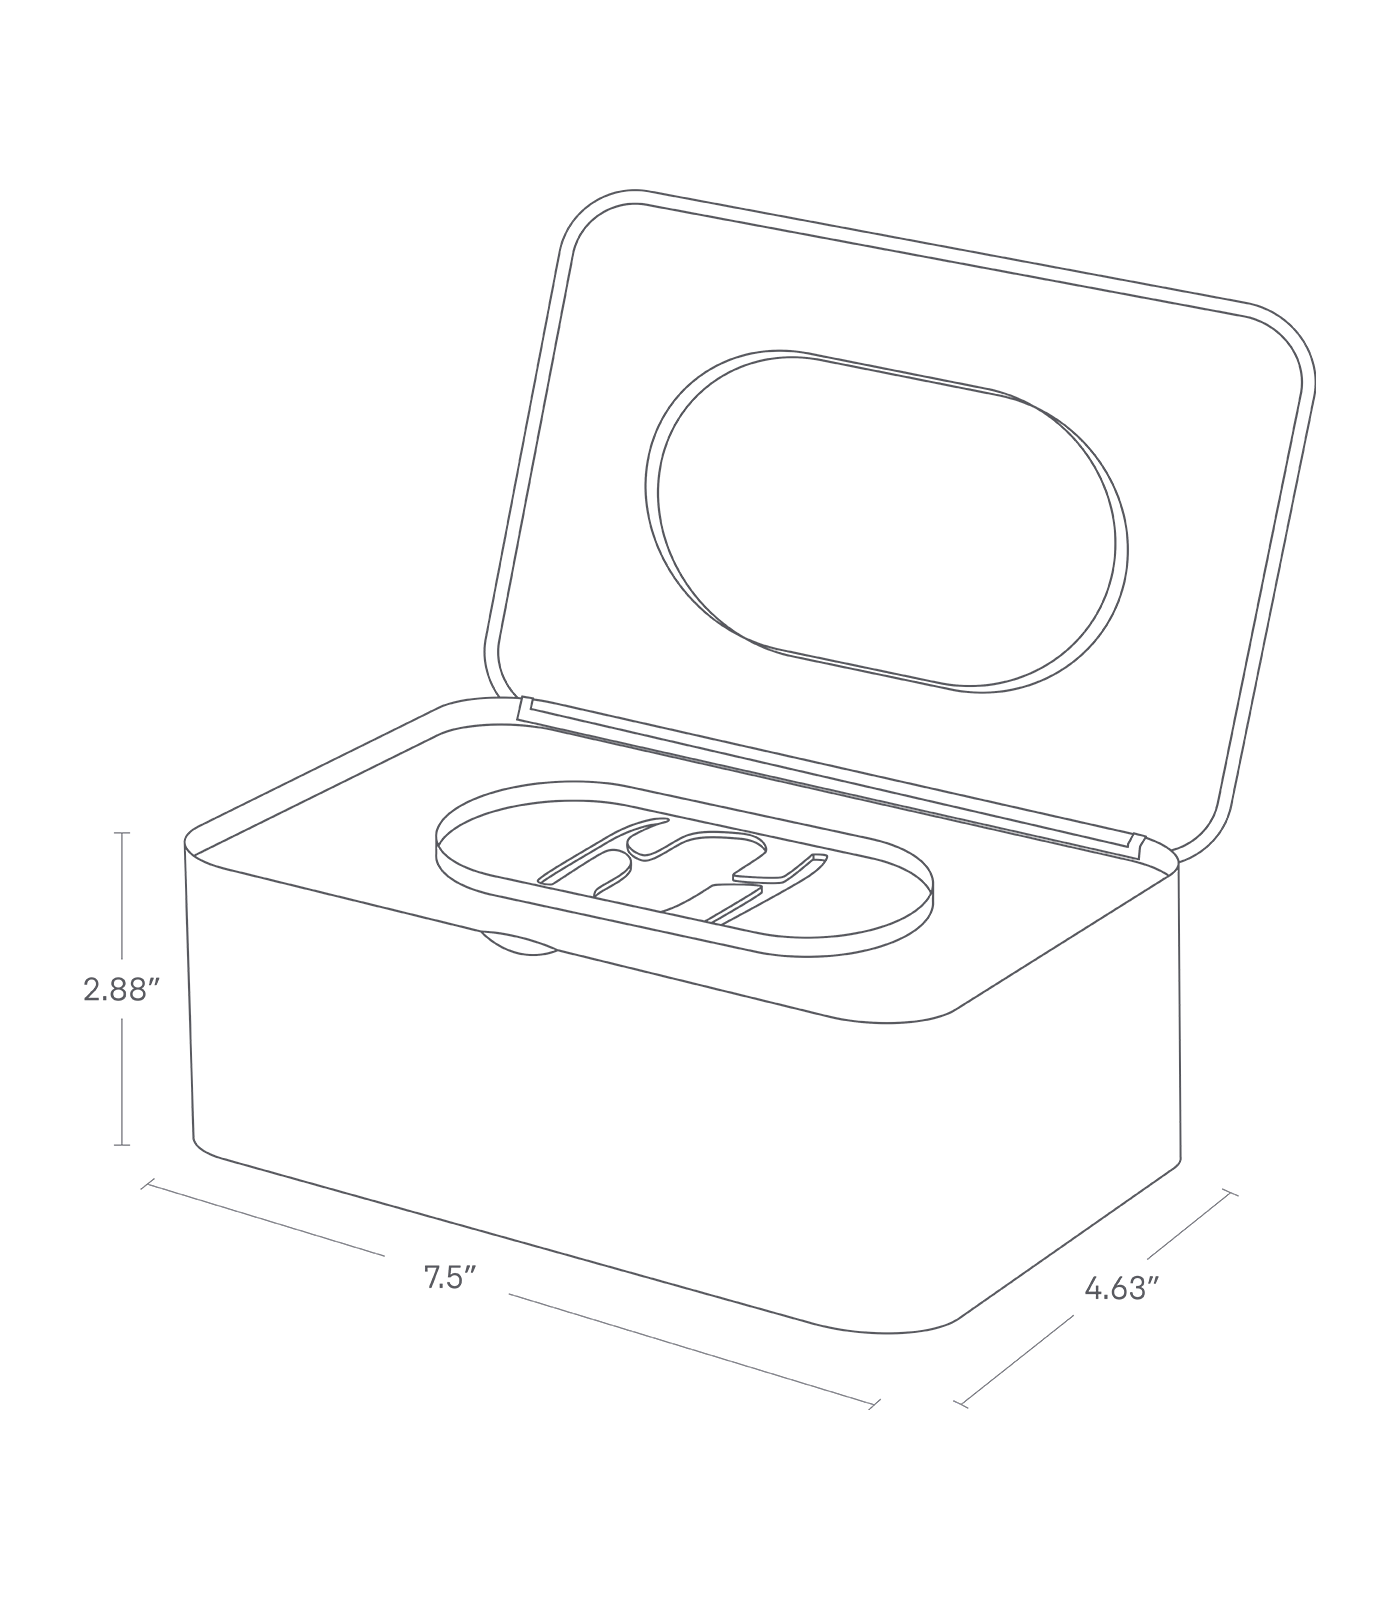 Dimension image for Wipes Dispenser on a white background including dimensions  L 4.72 x W 7.48 x H 2.95 inches